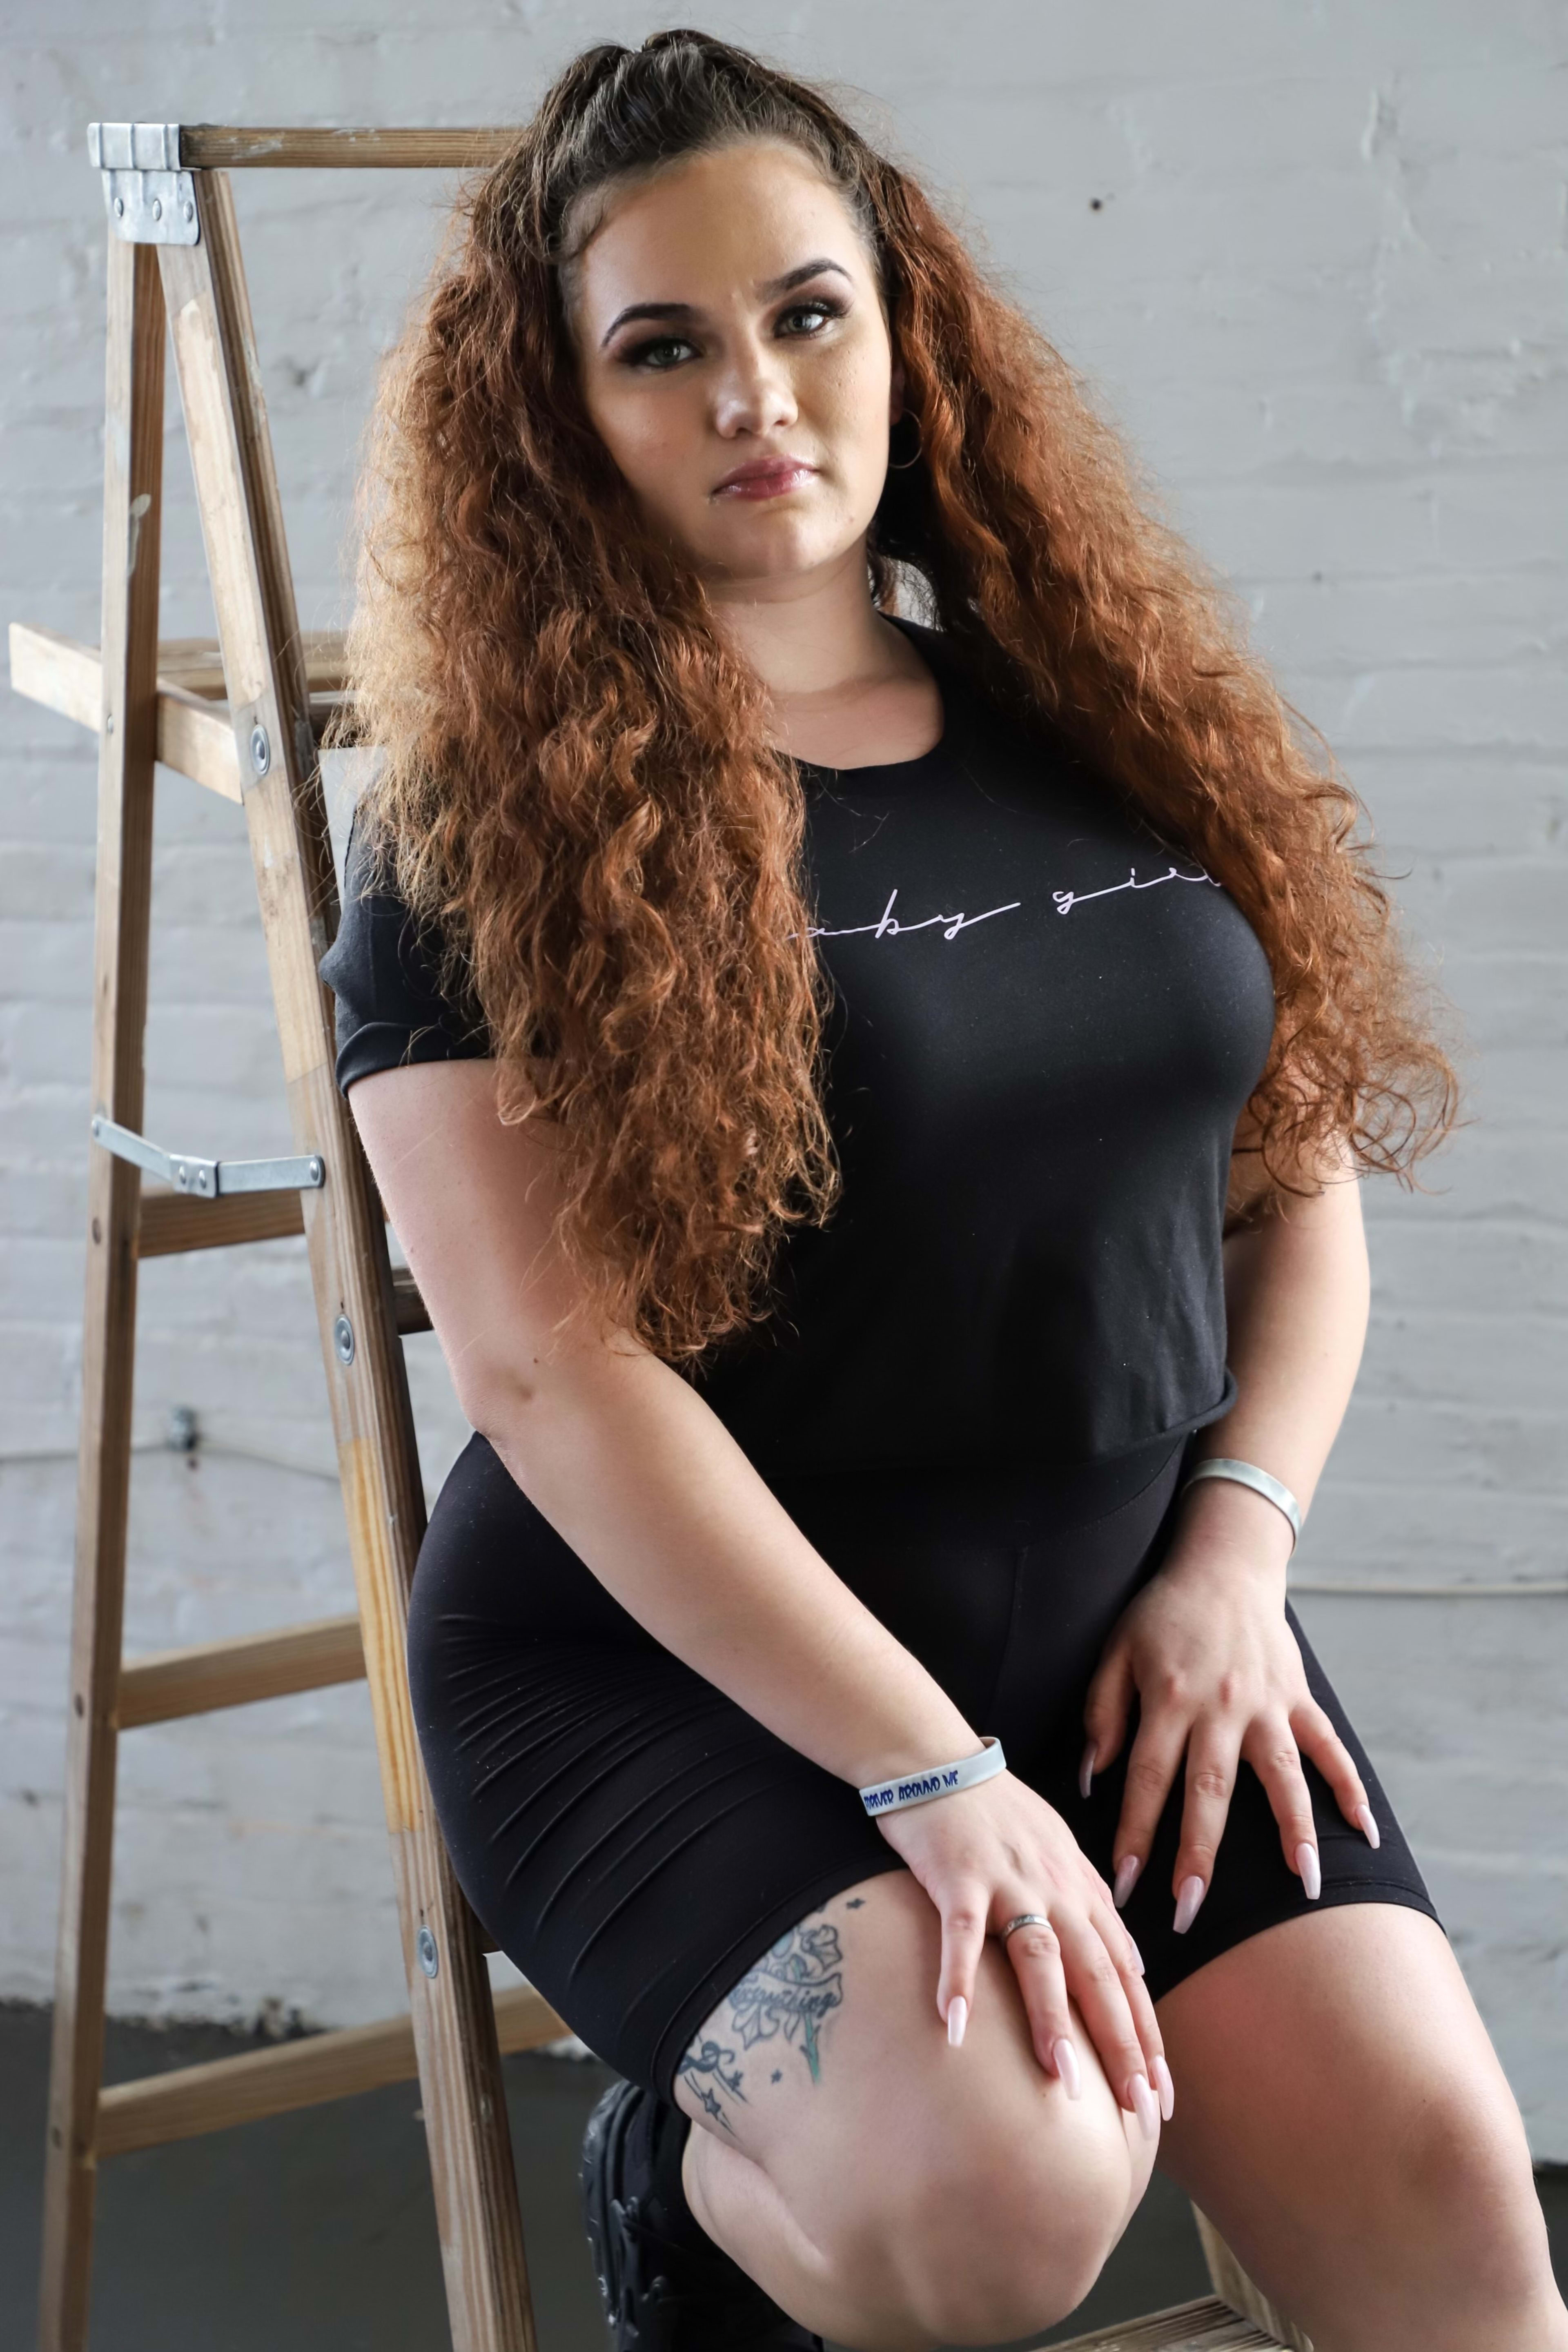 A woman posing for a portrait on a step ladder during a photoshoot.